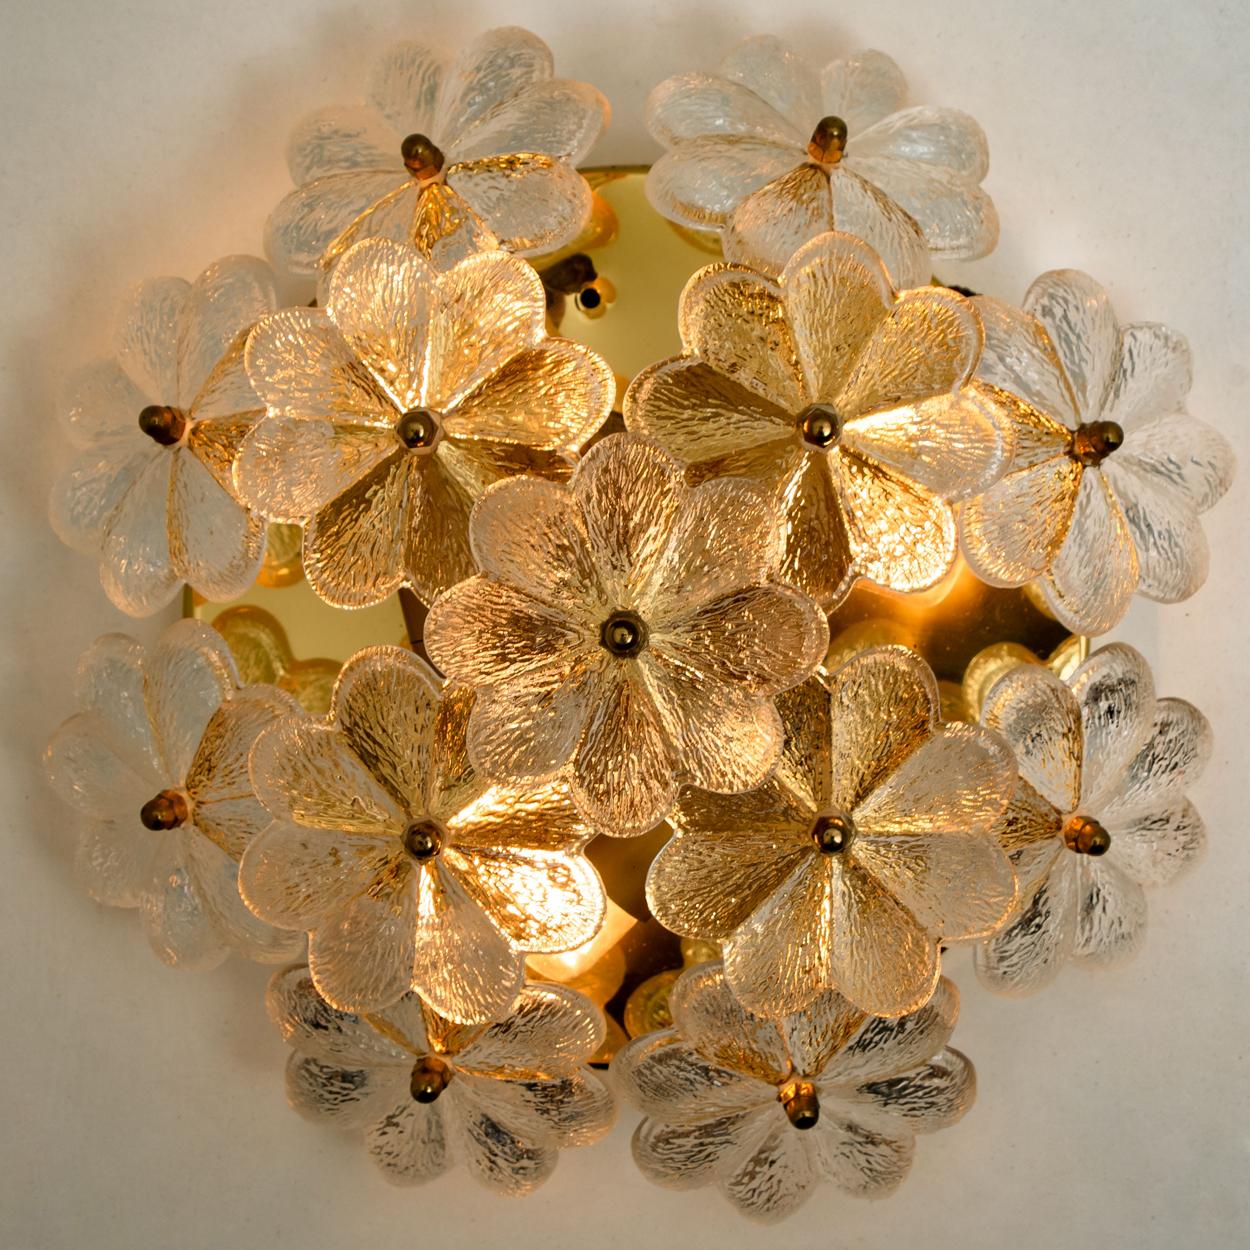 These pair of sculptural wall sconces have the design of a bouquet of textured glass flowers and are from the historical lighting company Ernst Palme. Each light has thirteen glass shades. Flower shaped.

Each clear glass flower shade has textured